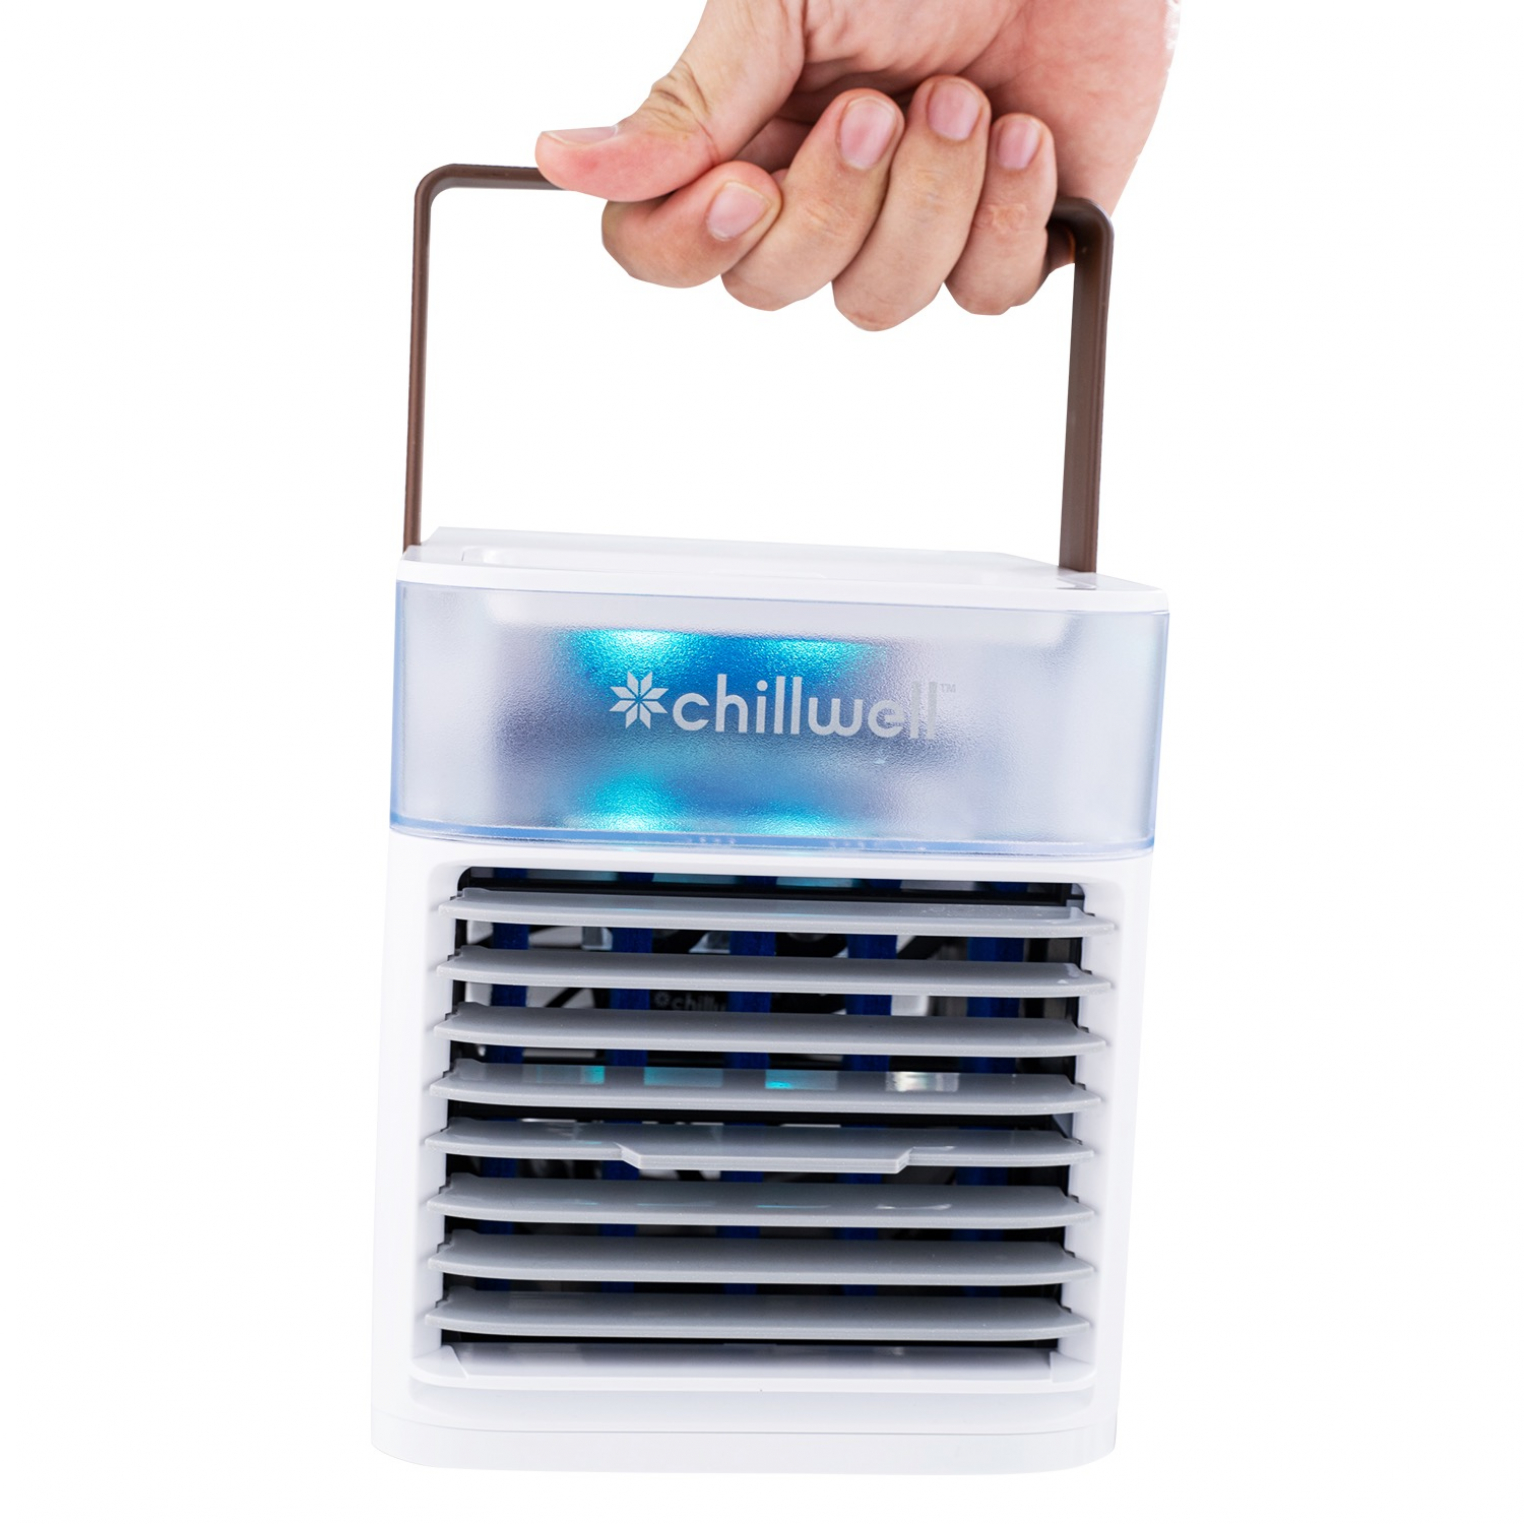 Chillwell Ac Evaporative Air Cooler Specs